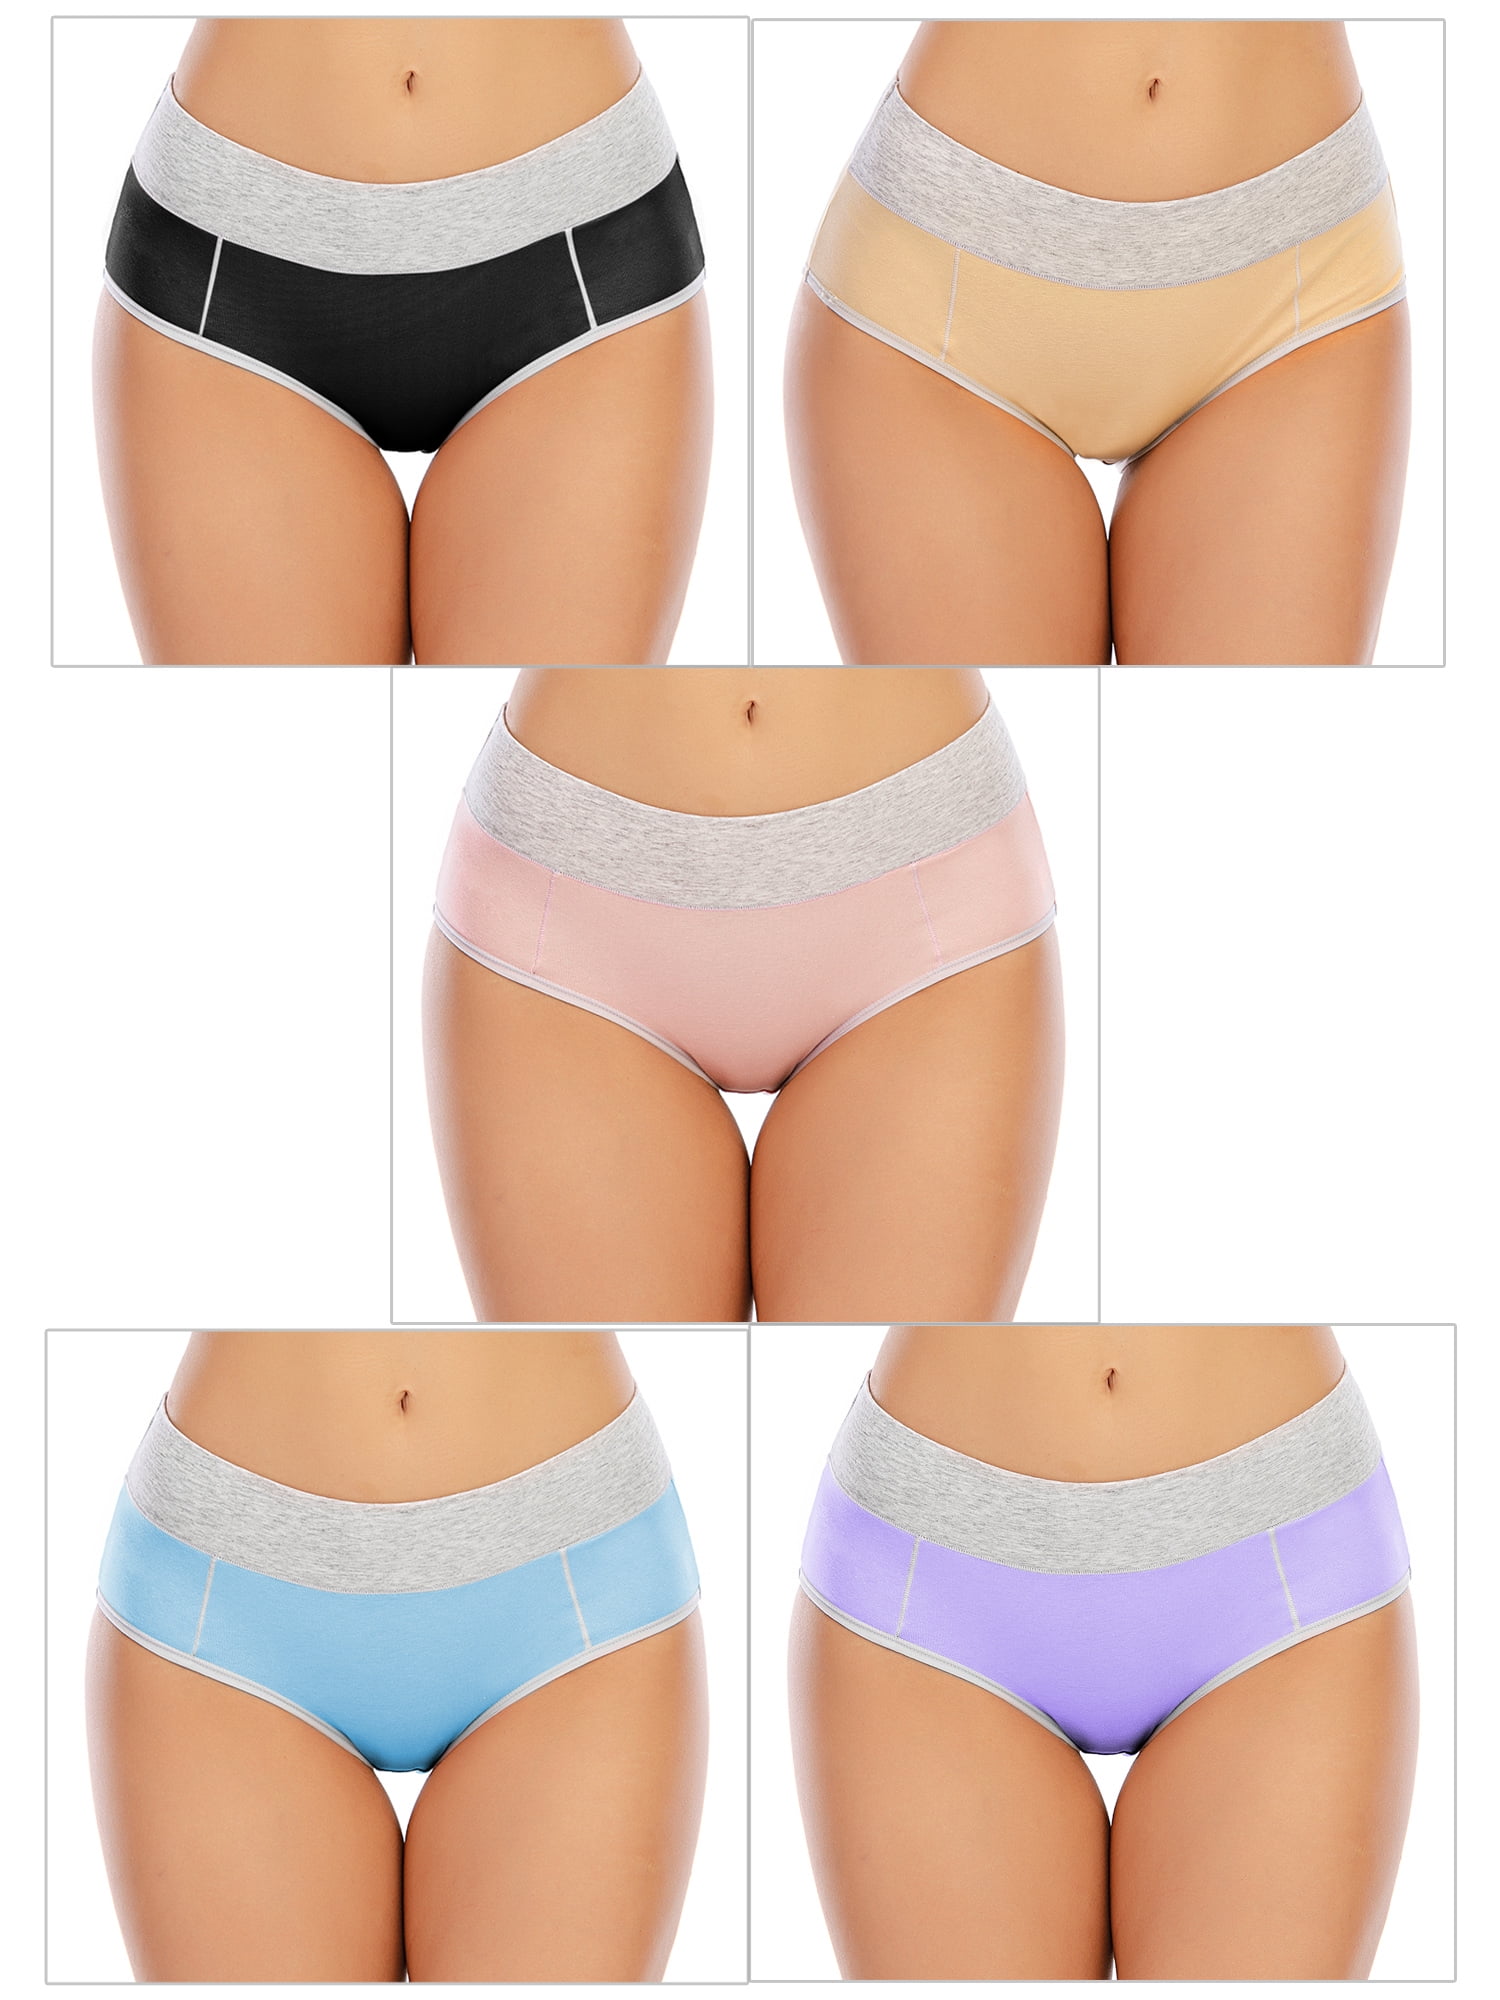 DODOING 4 Pack Women's Plus Size Tummy Control Panties Briefs, Soft Cotton  High Waist Breathable Brief Seamless Panties for Women 